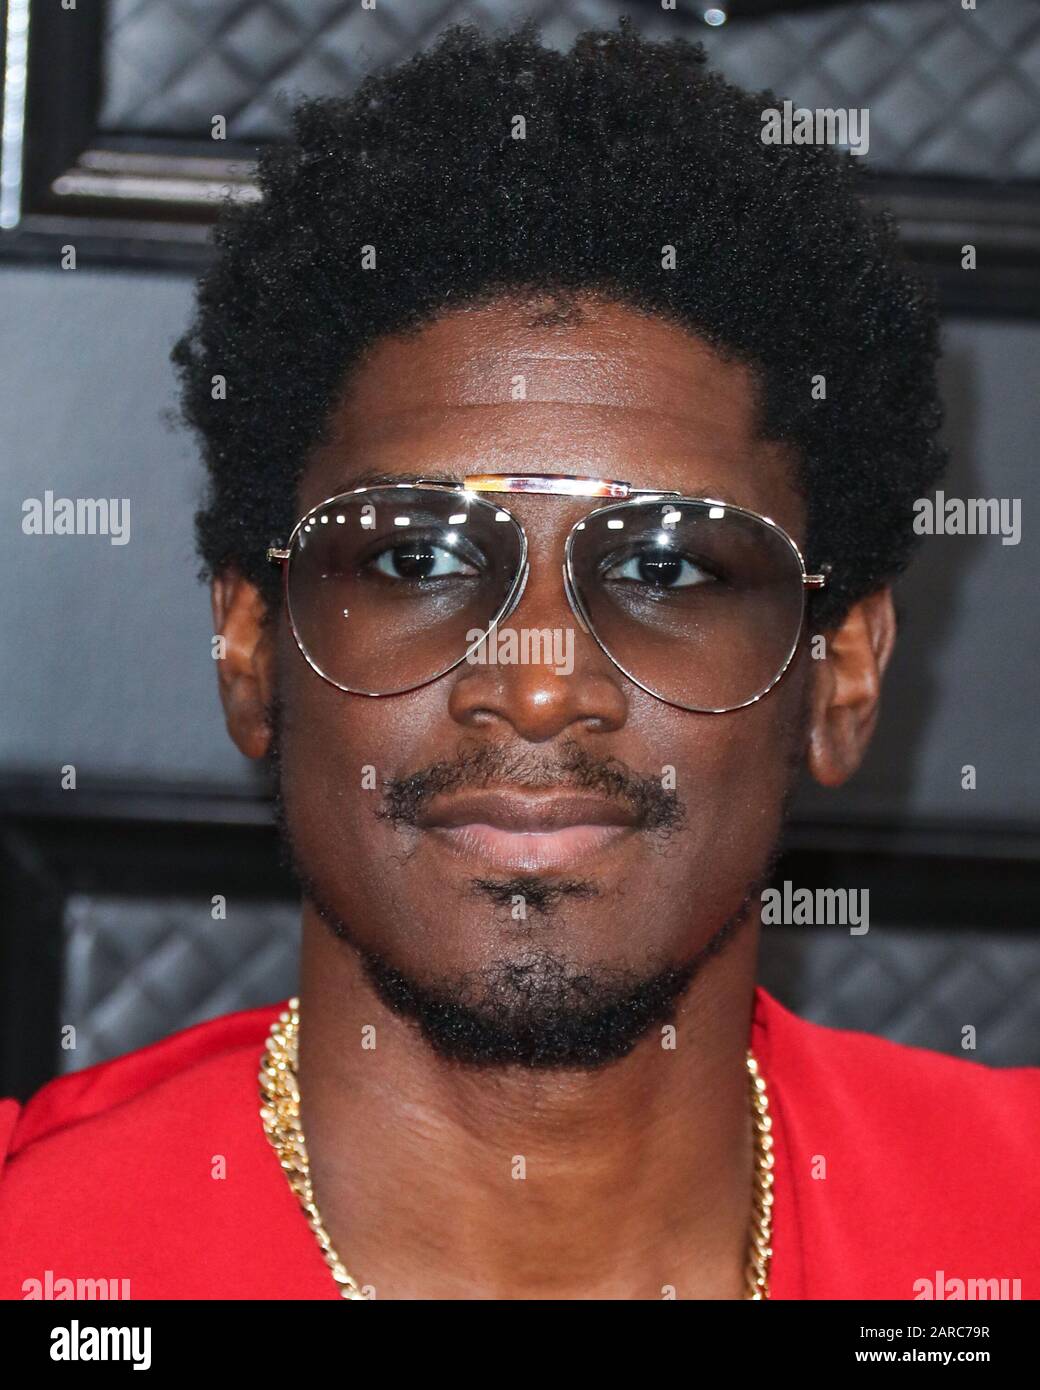 LOS ANGELES, CALIFORNIA, USA - JANUARY 26: Labrinth arrives at the 62nd Annual GRAMMY Awards held at Staples Center on January 26, 2020 in Los Angeles, California, United States. (Photo by Xavier Collin/Image Press Agency) Stock Photo